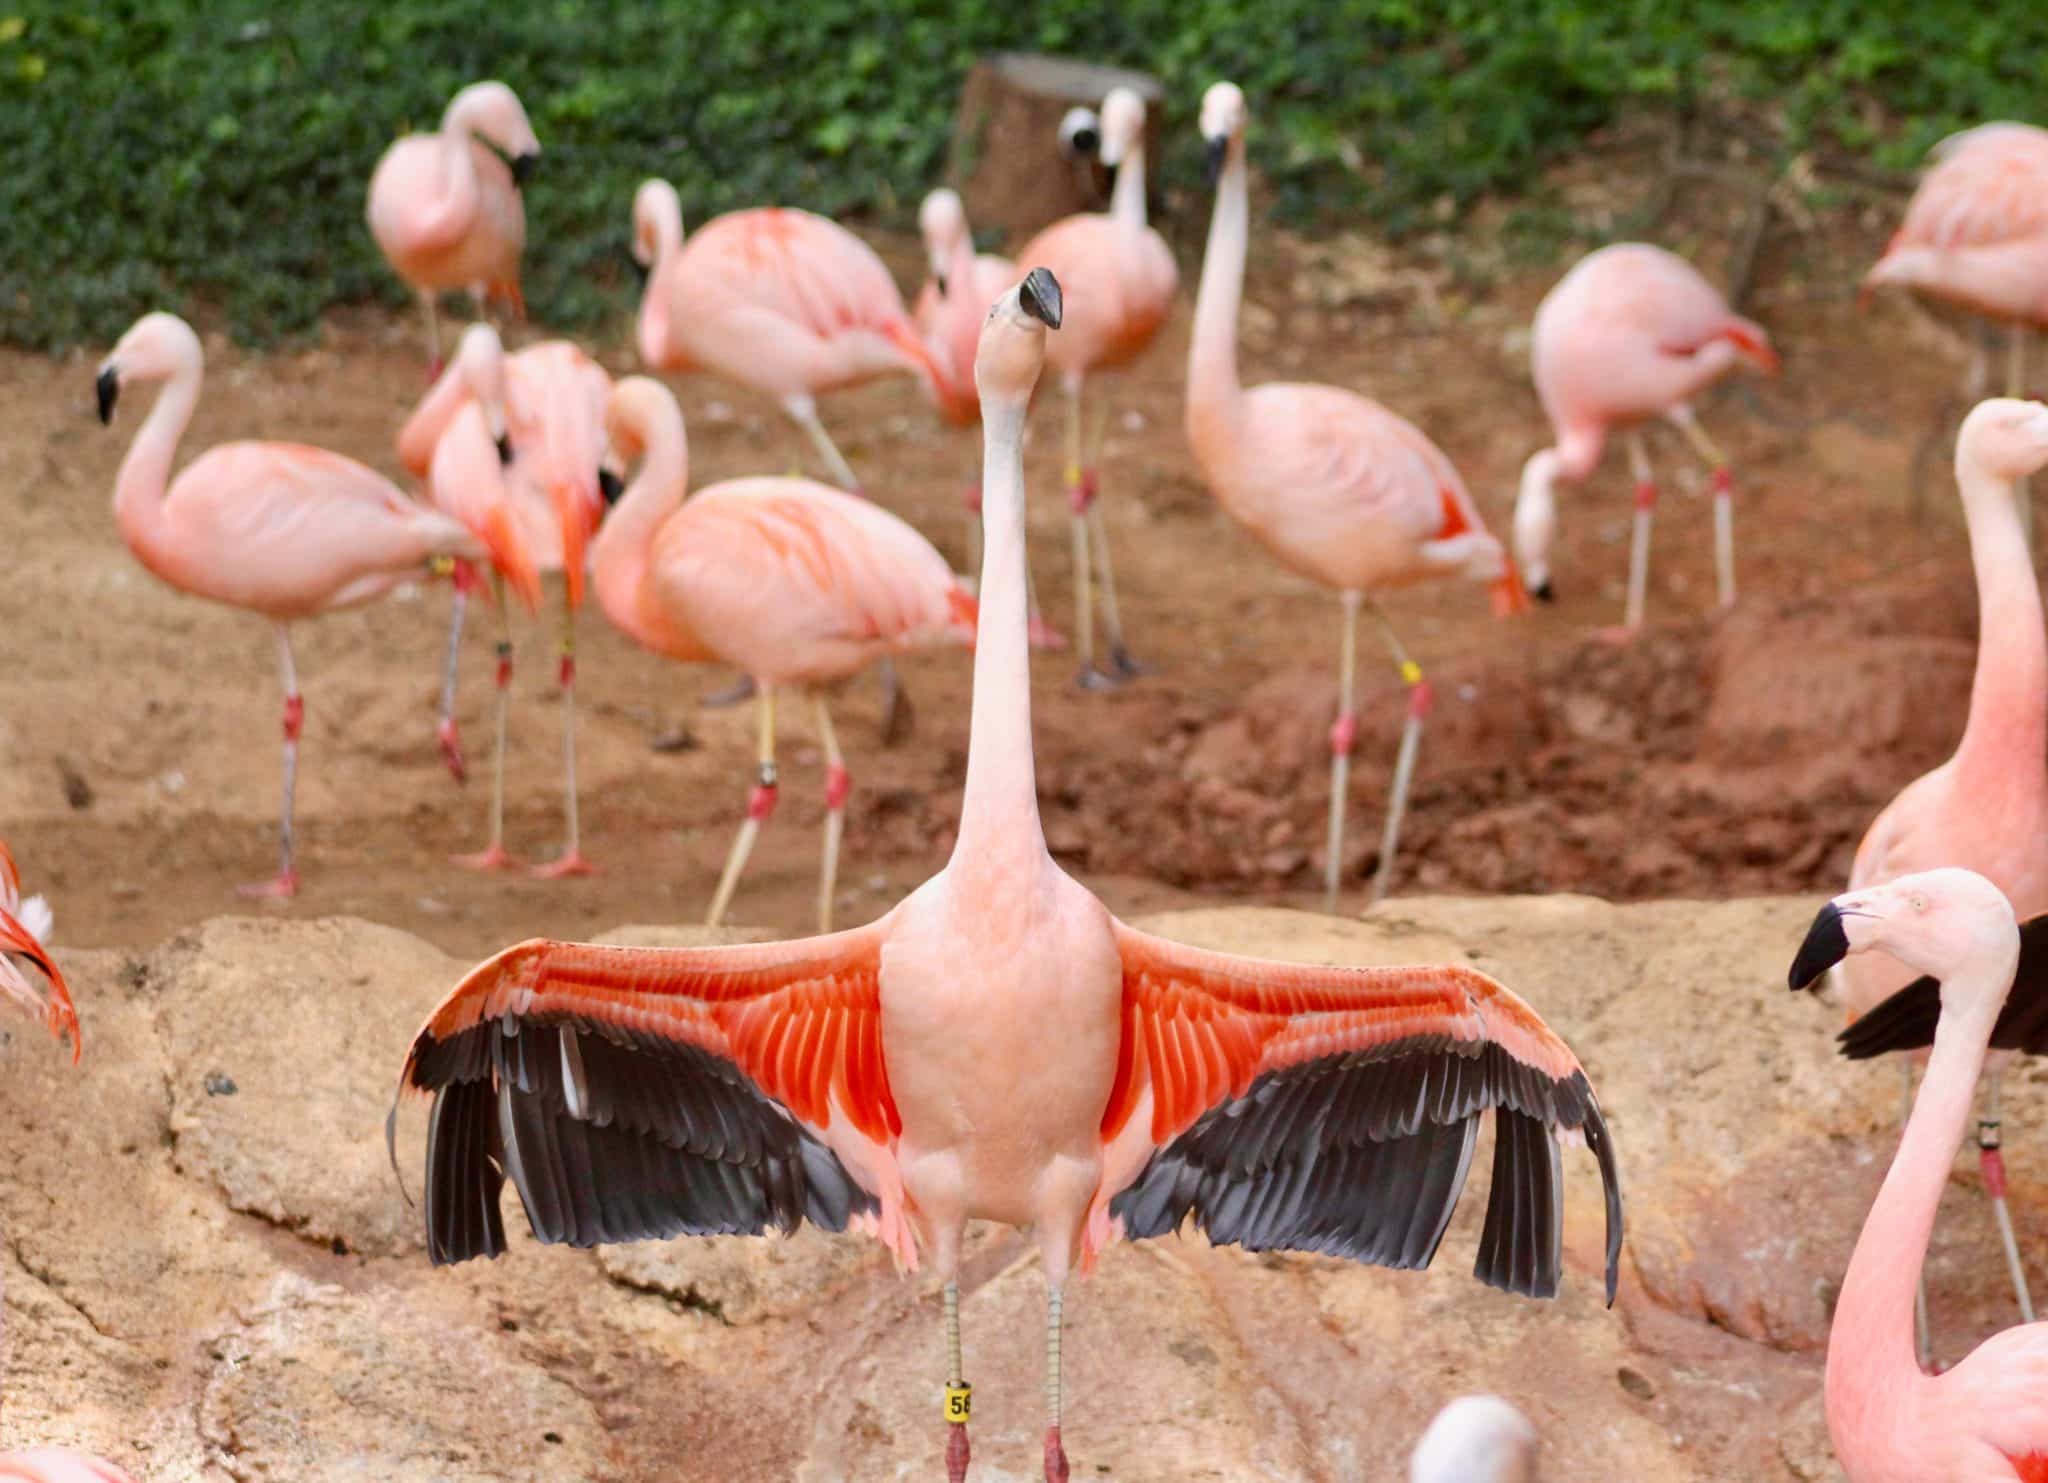 Chilean flamingos at Zoo Atlanta with one flamingo in the center of the image spreading its wings.